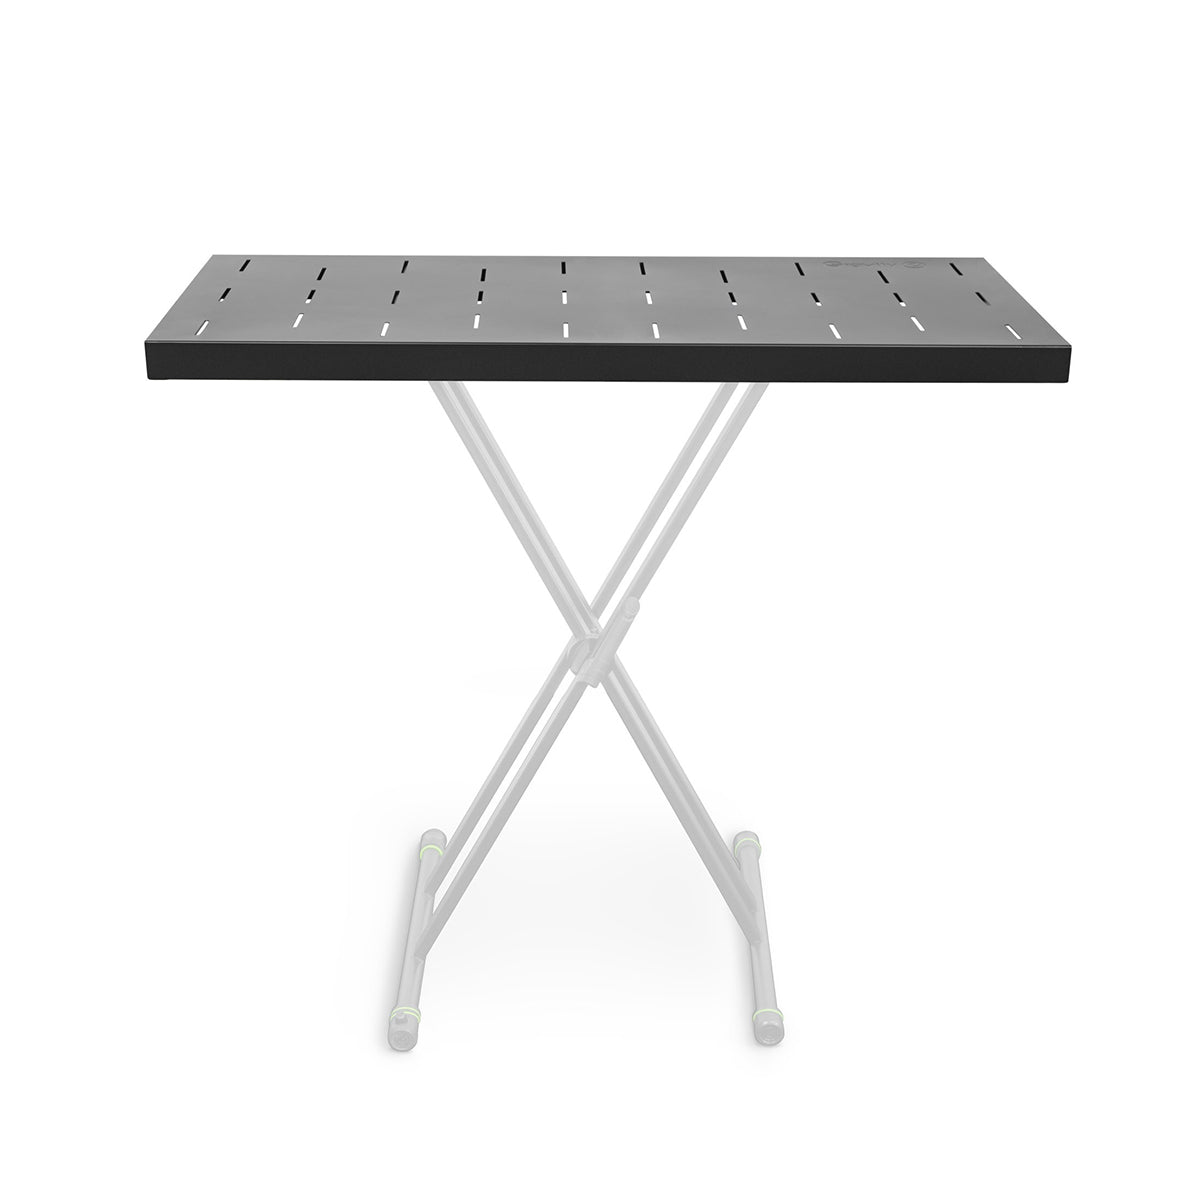 Gravity KS-RD1 Rapid Desk for X-Type Keyboard Stands